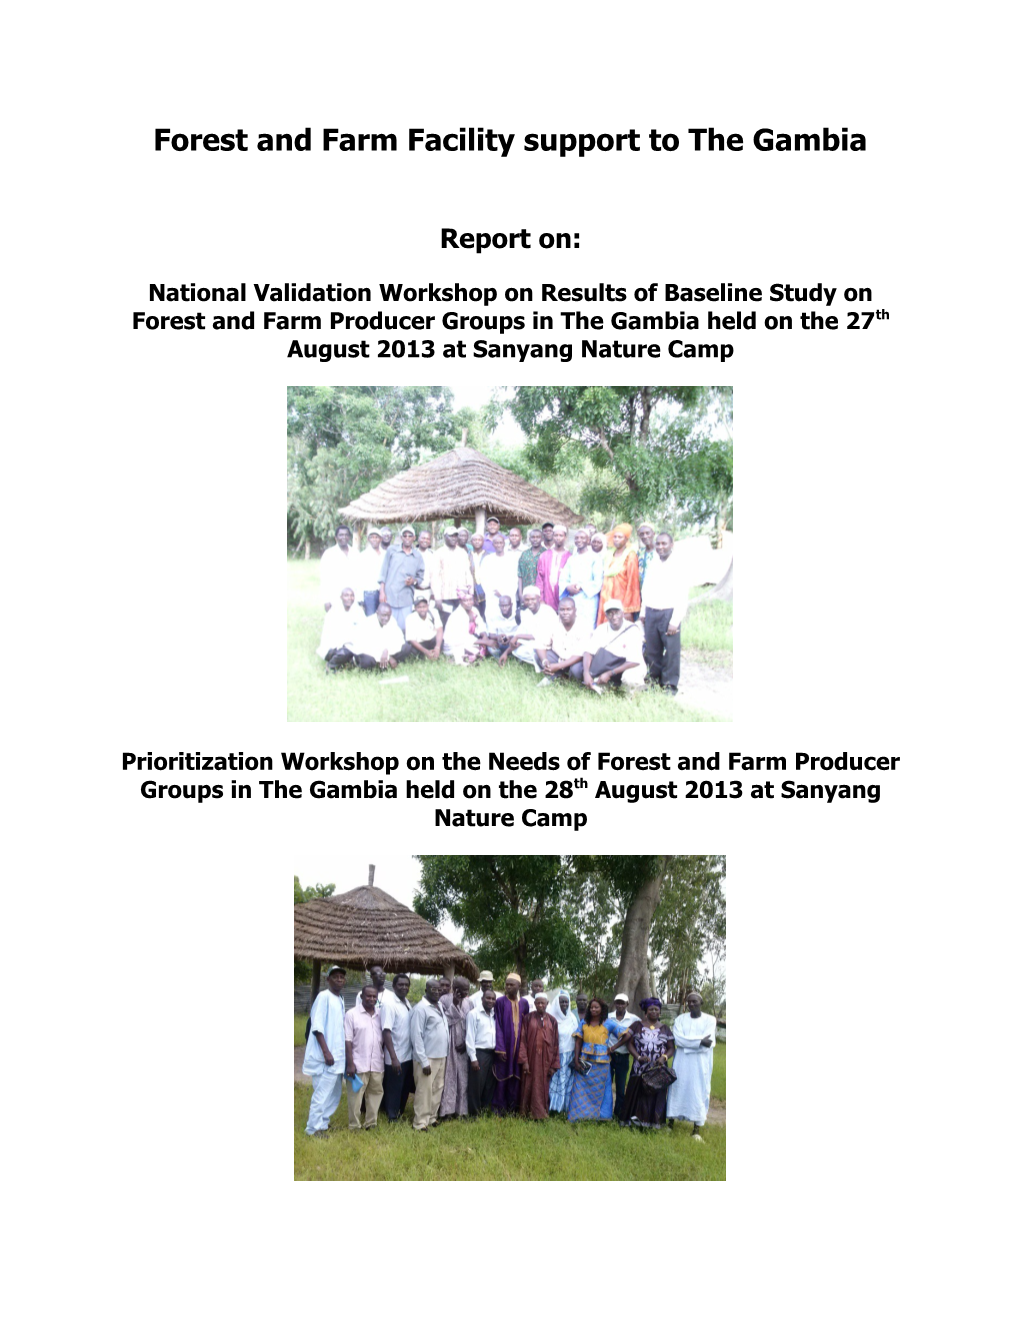 Forest and Farm Facility Support to the Gambia